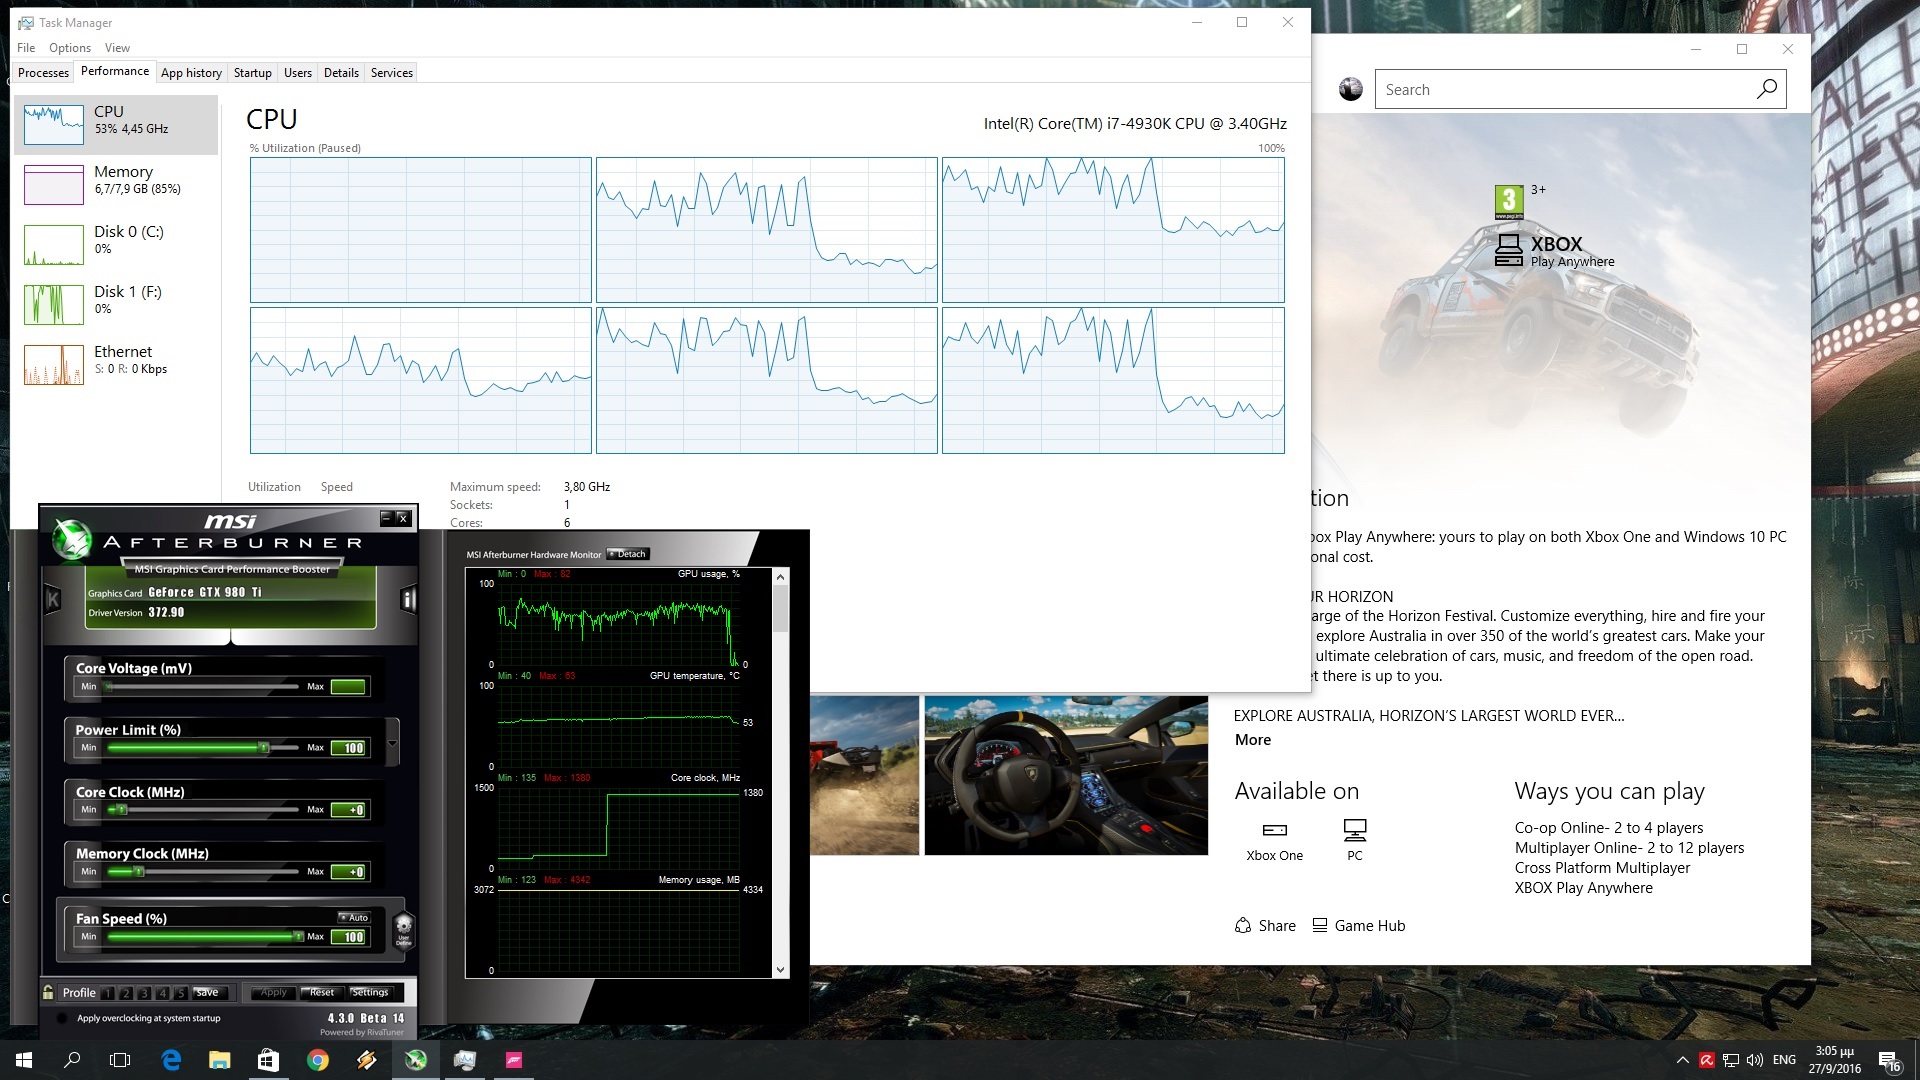 Will my CPU be enough for Forza Horizon 3?